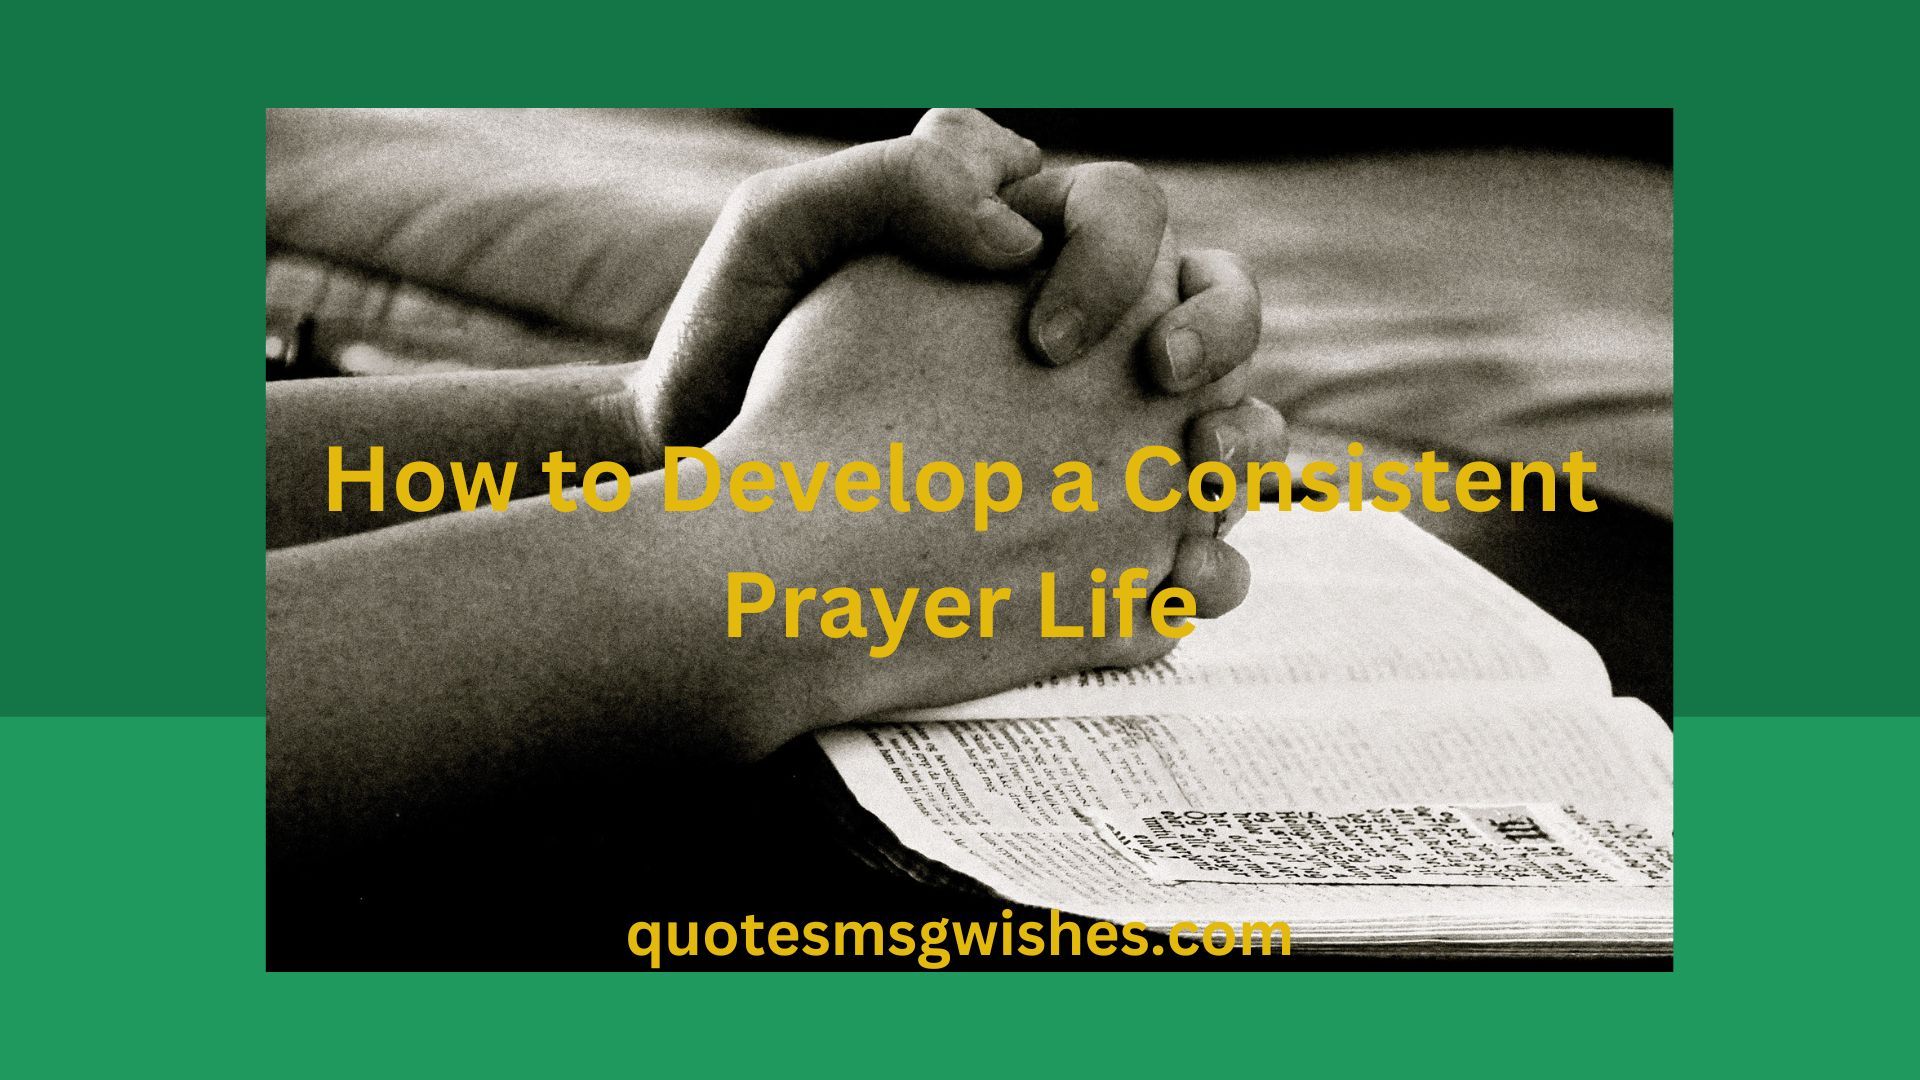 How to Develop a Consistent Prayer Life